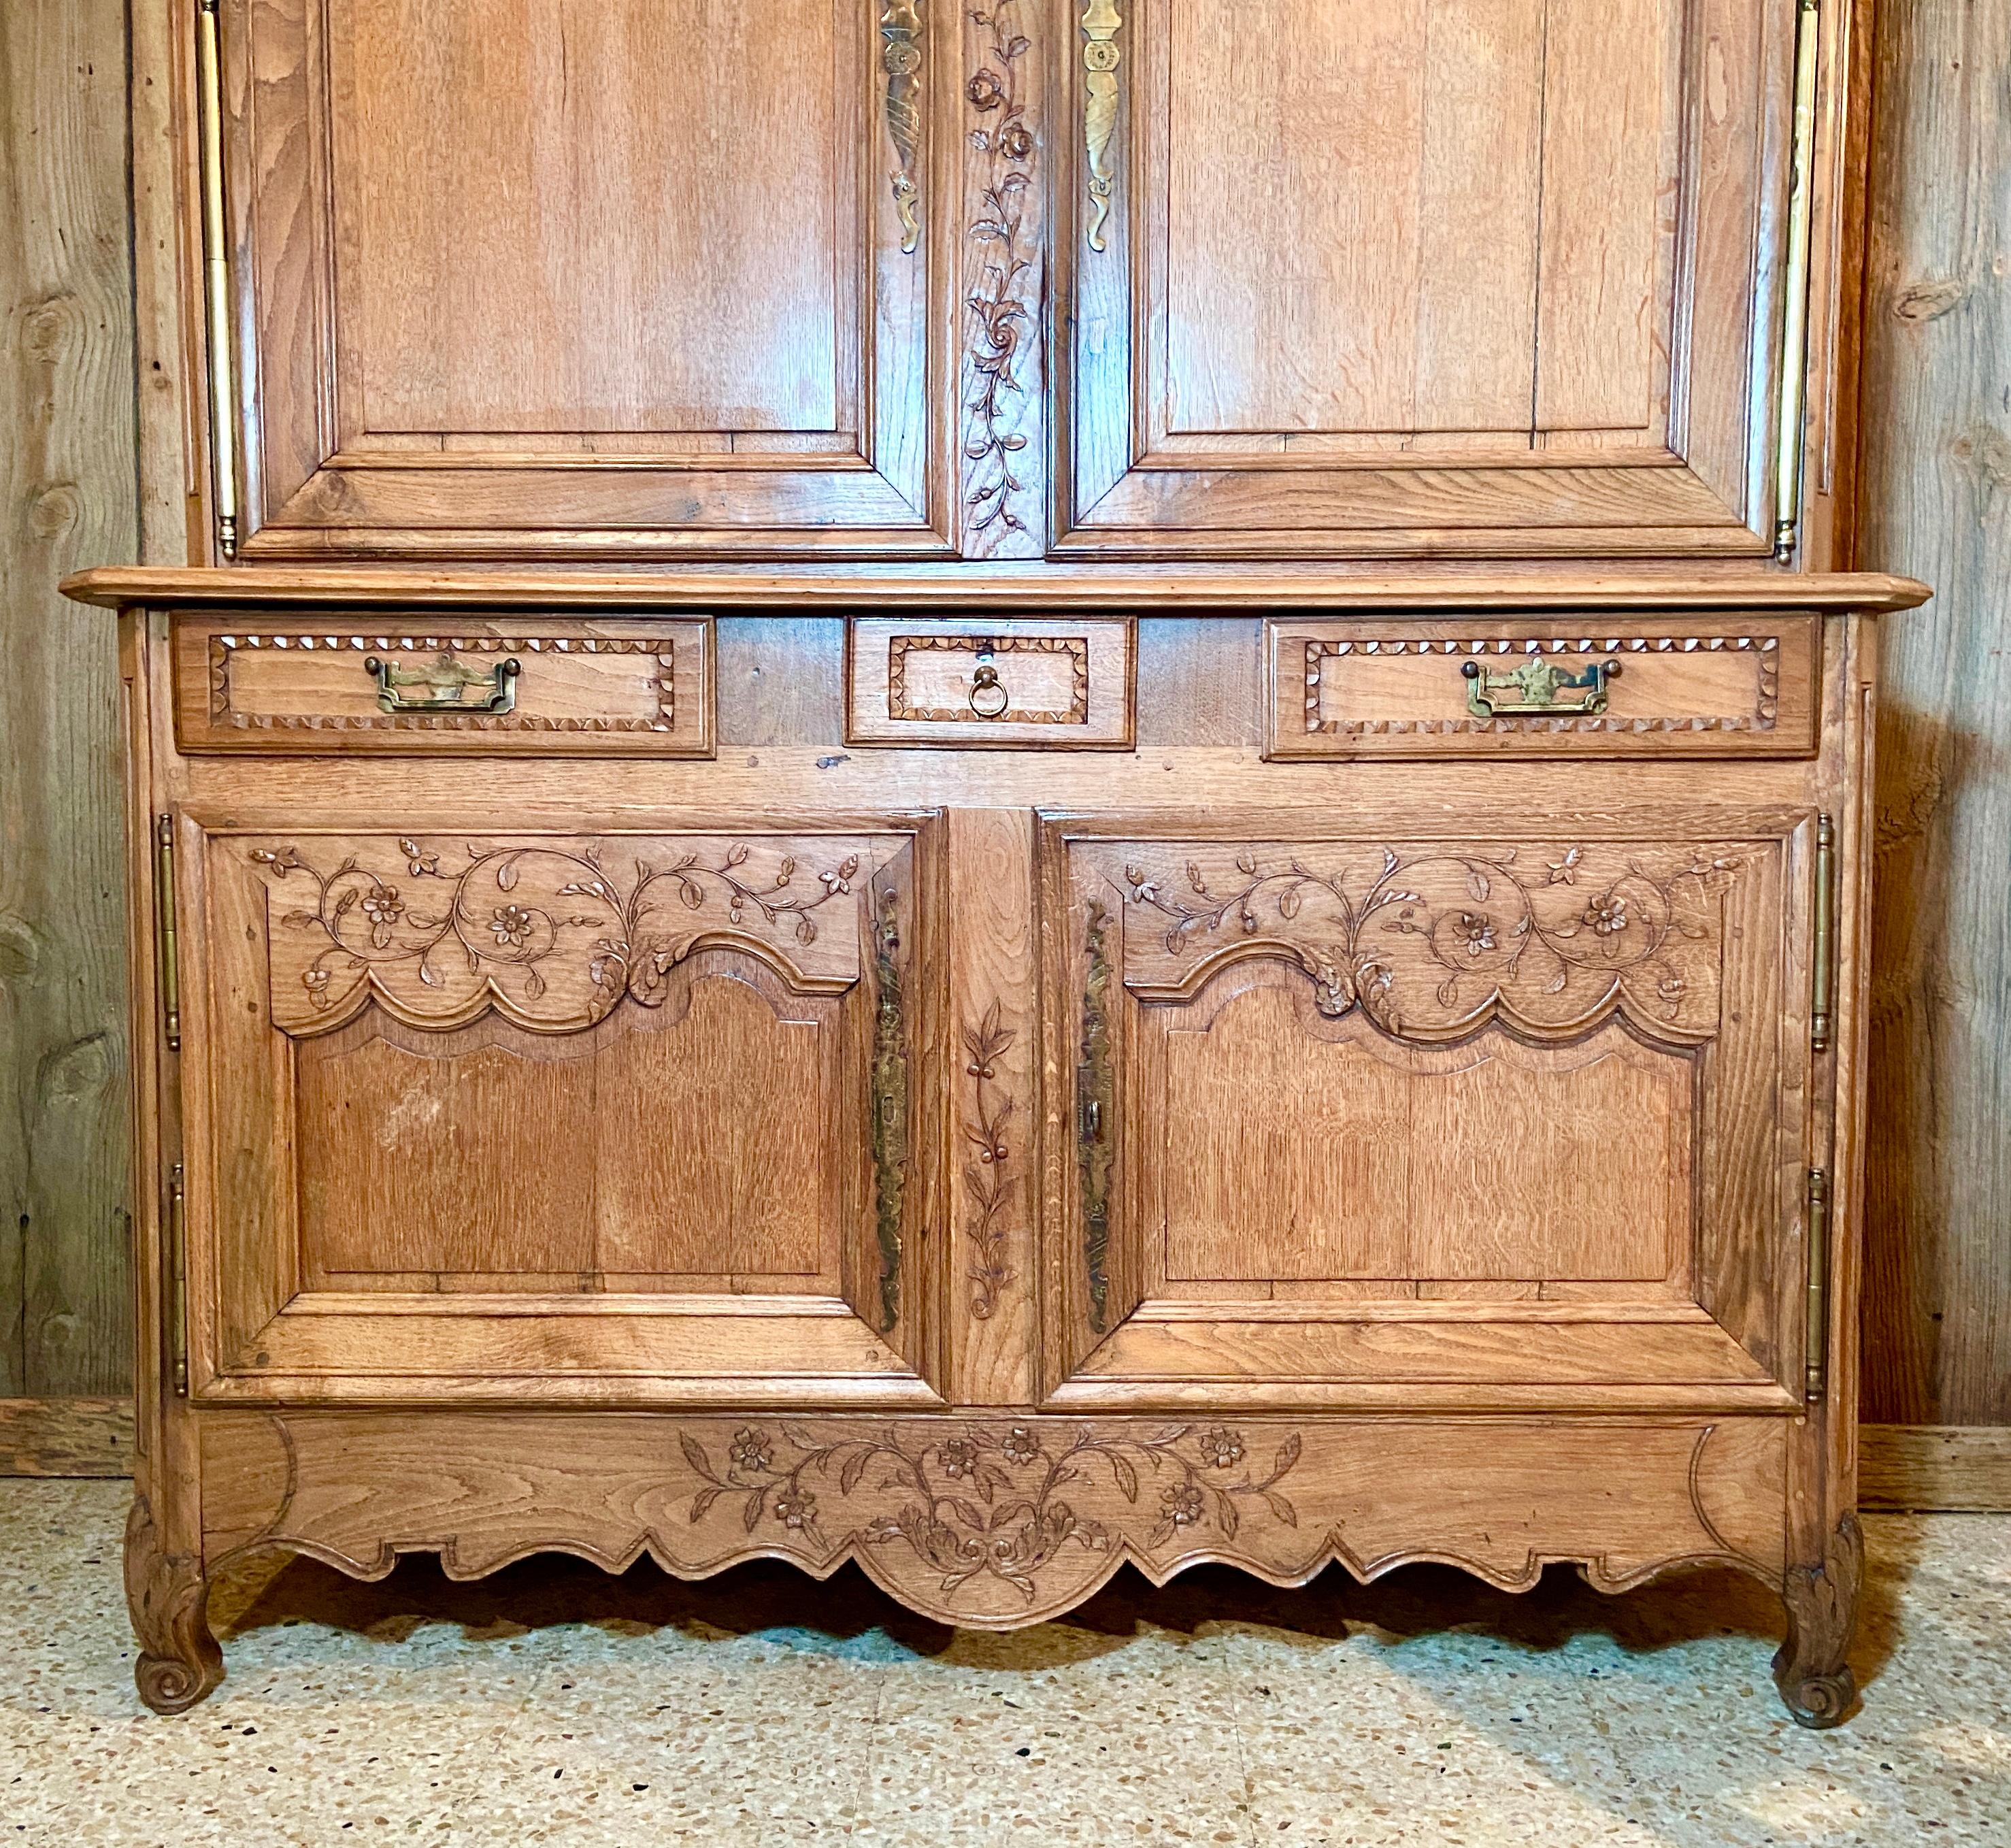 Antique 19th Century French Provincial Carved Beechwood Buffet / Storage Cabinet In Good Condition For Sale In New Orleans, LA